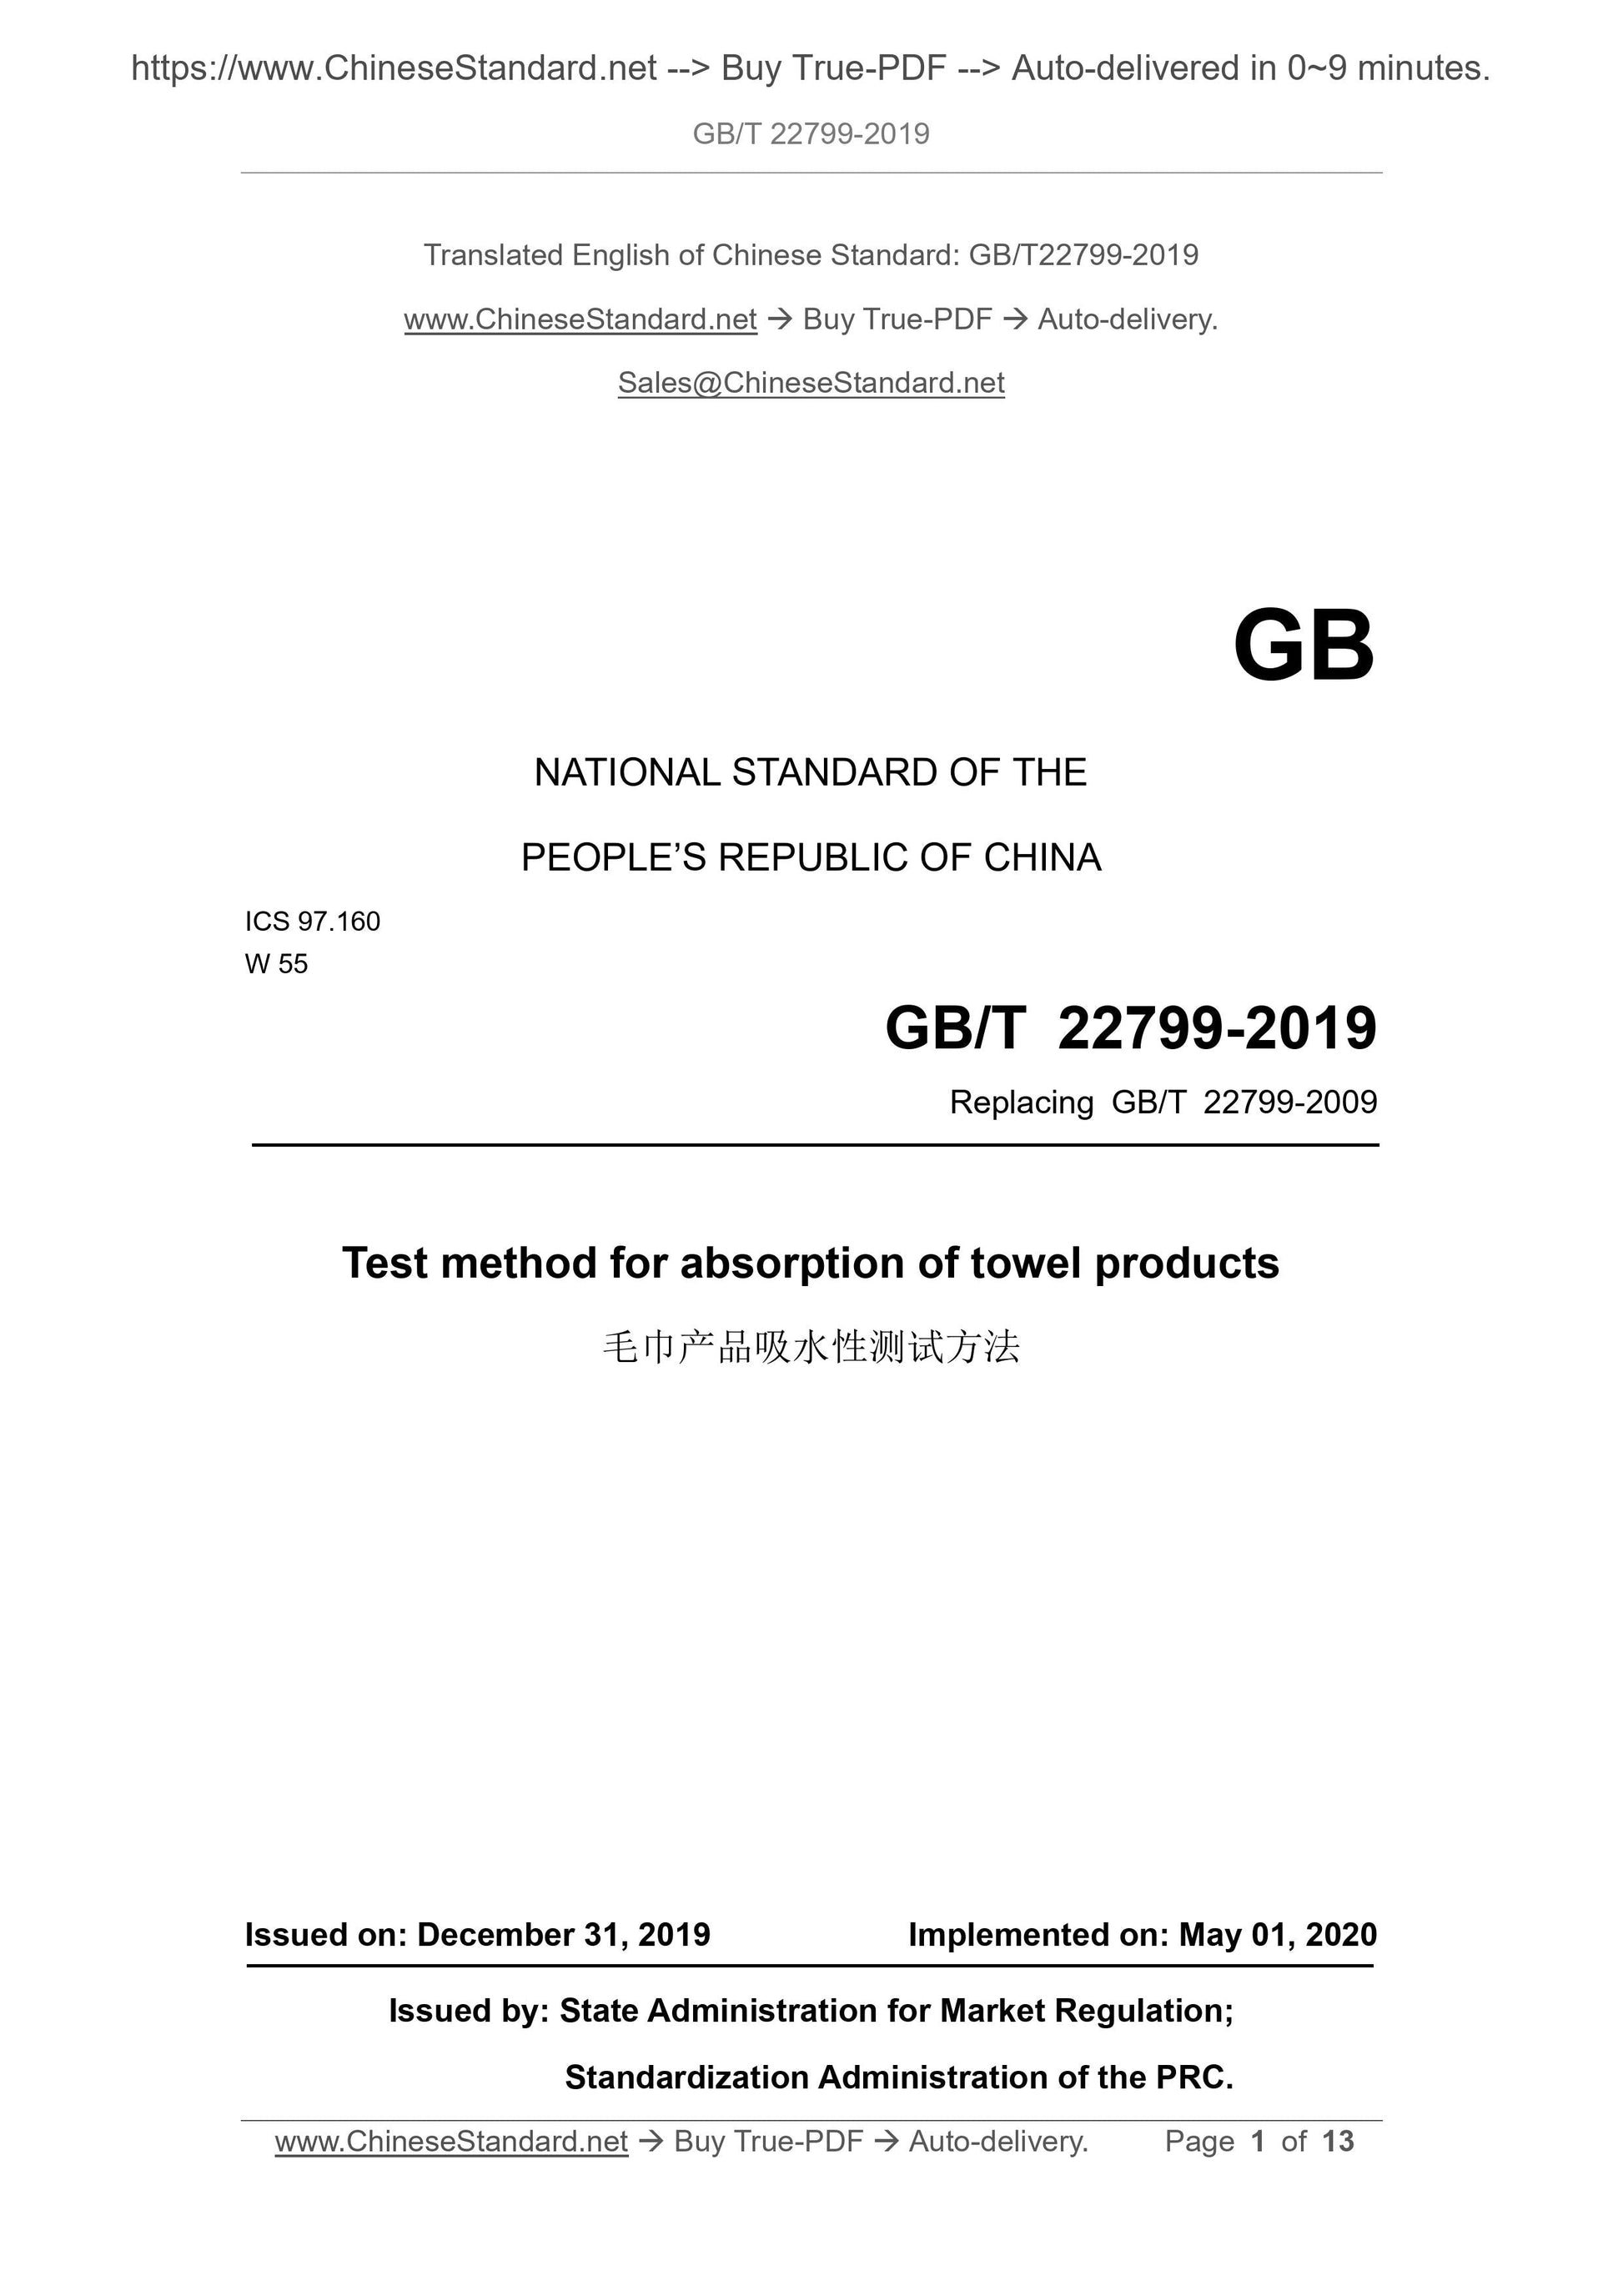 GB/T 22799-2019 Page 1